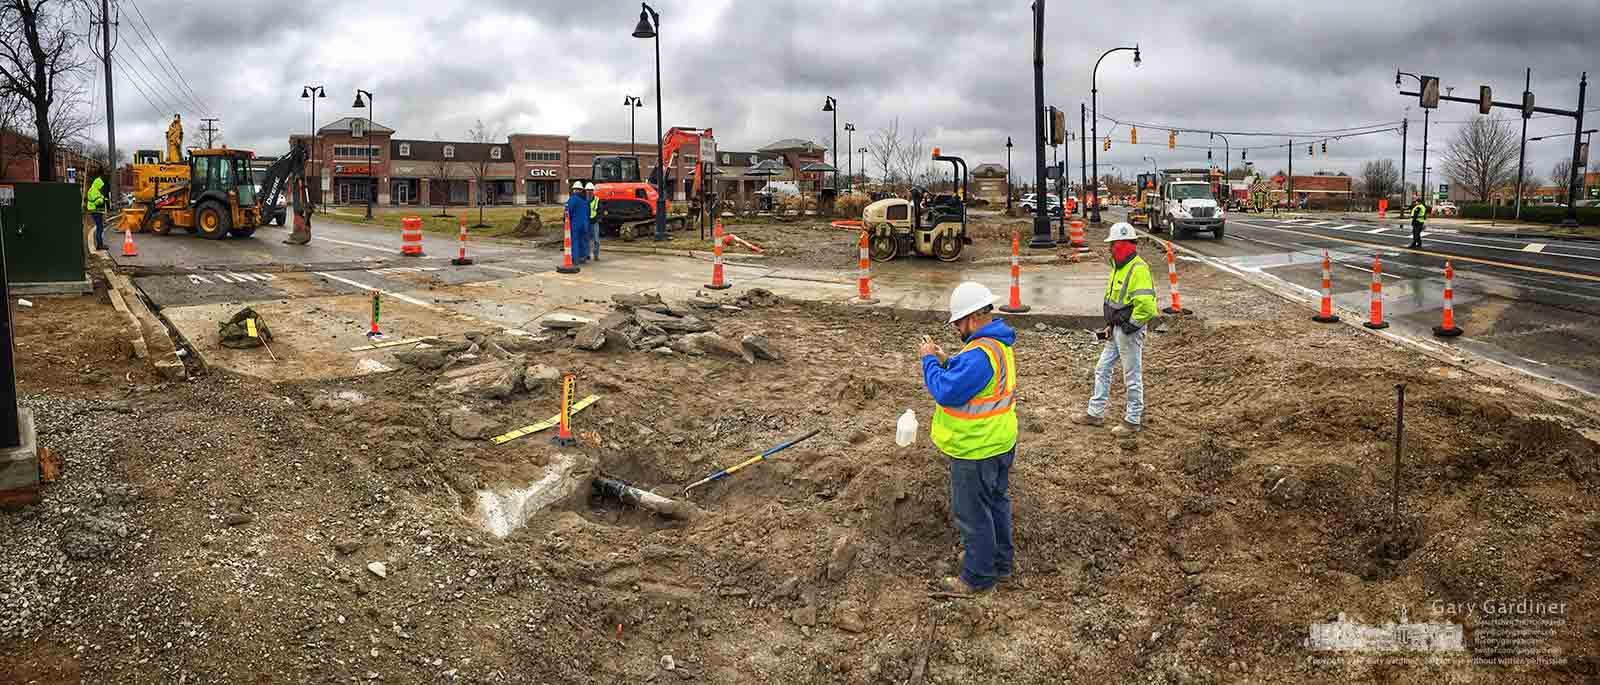 Construction and gas company workers inspect the patch on a four-inch gas line that was broken as the contractors removed the old entrance into Westerville Square shopping Center in Westerville. Ohio, forcing road closings for most of the morning. My Final Photo for Jan. 24, 2017.